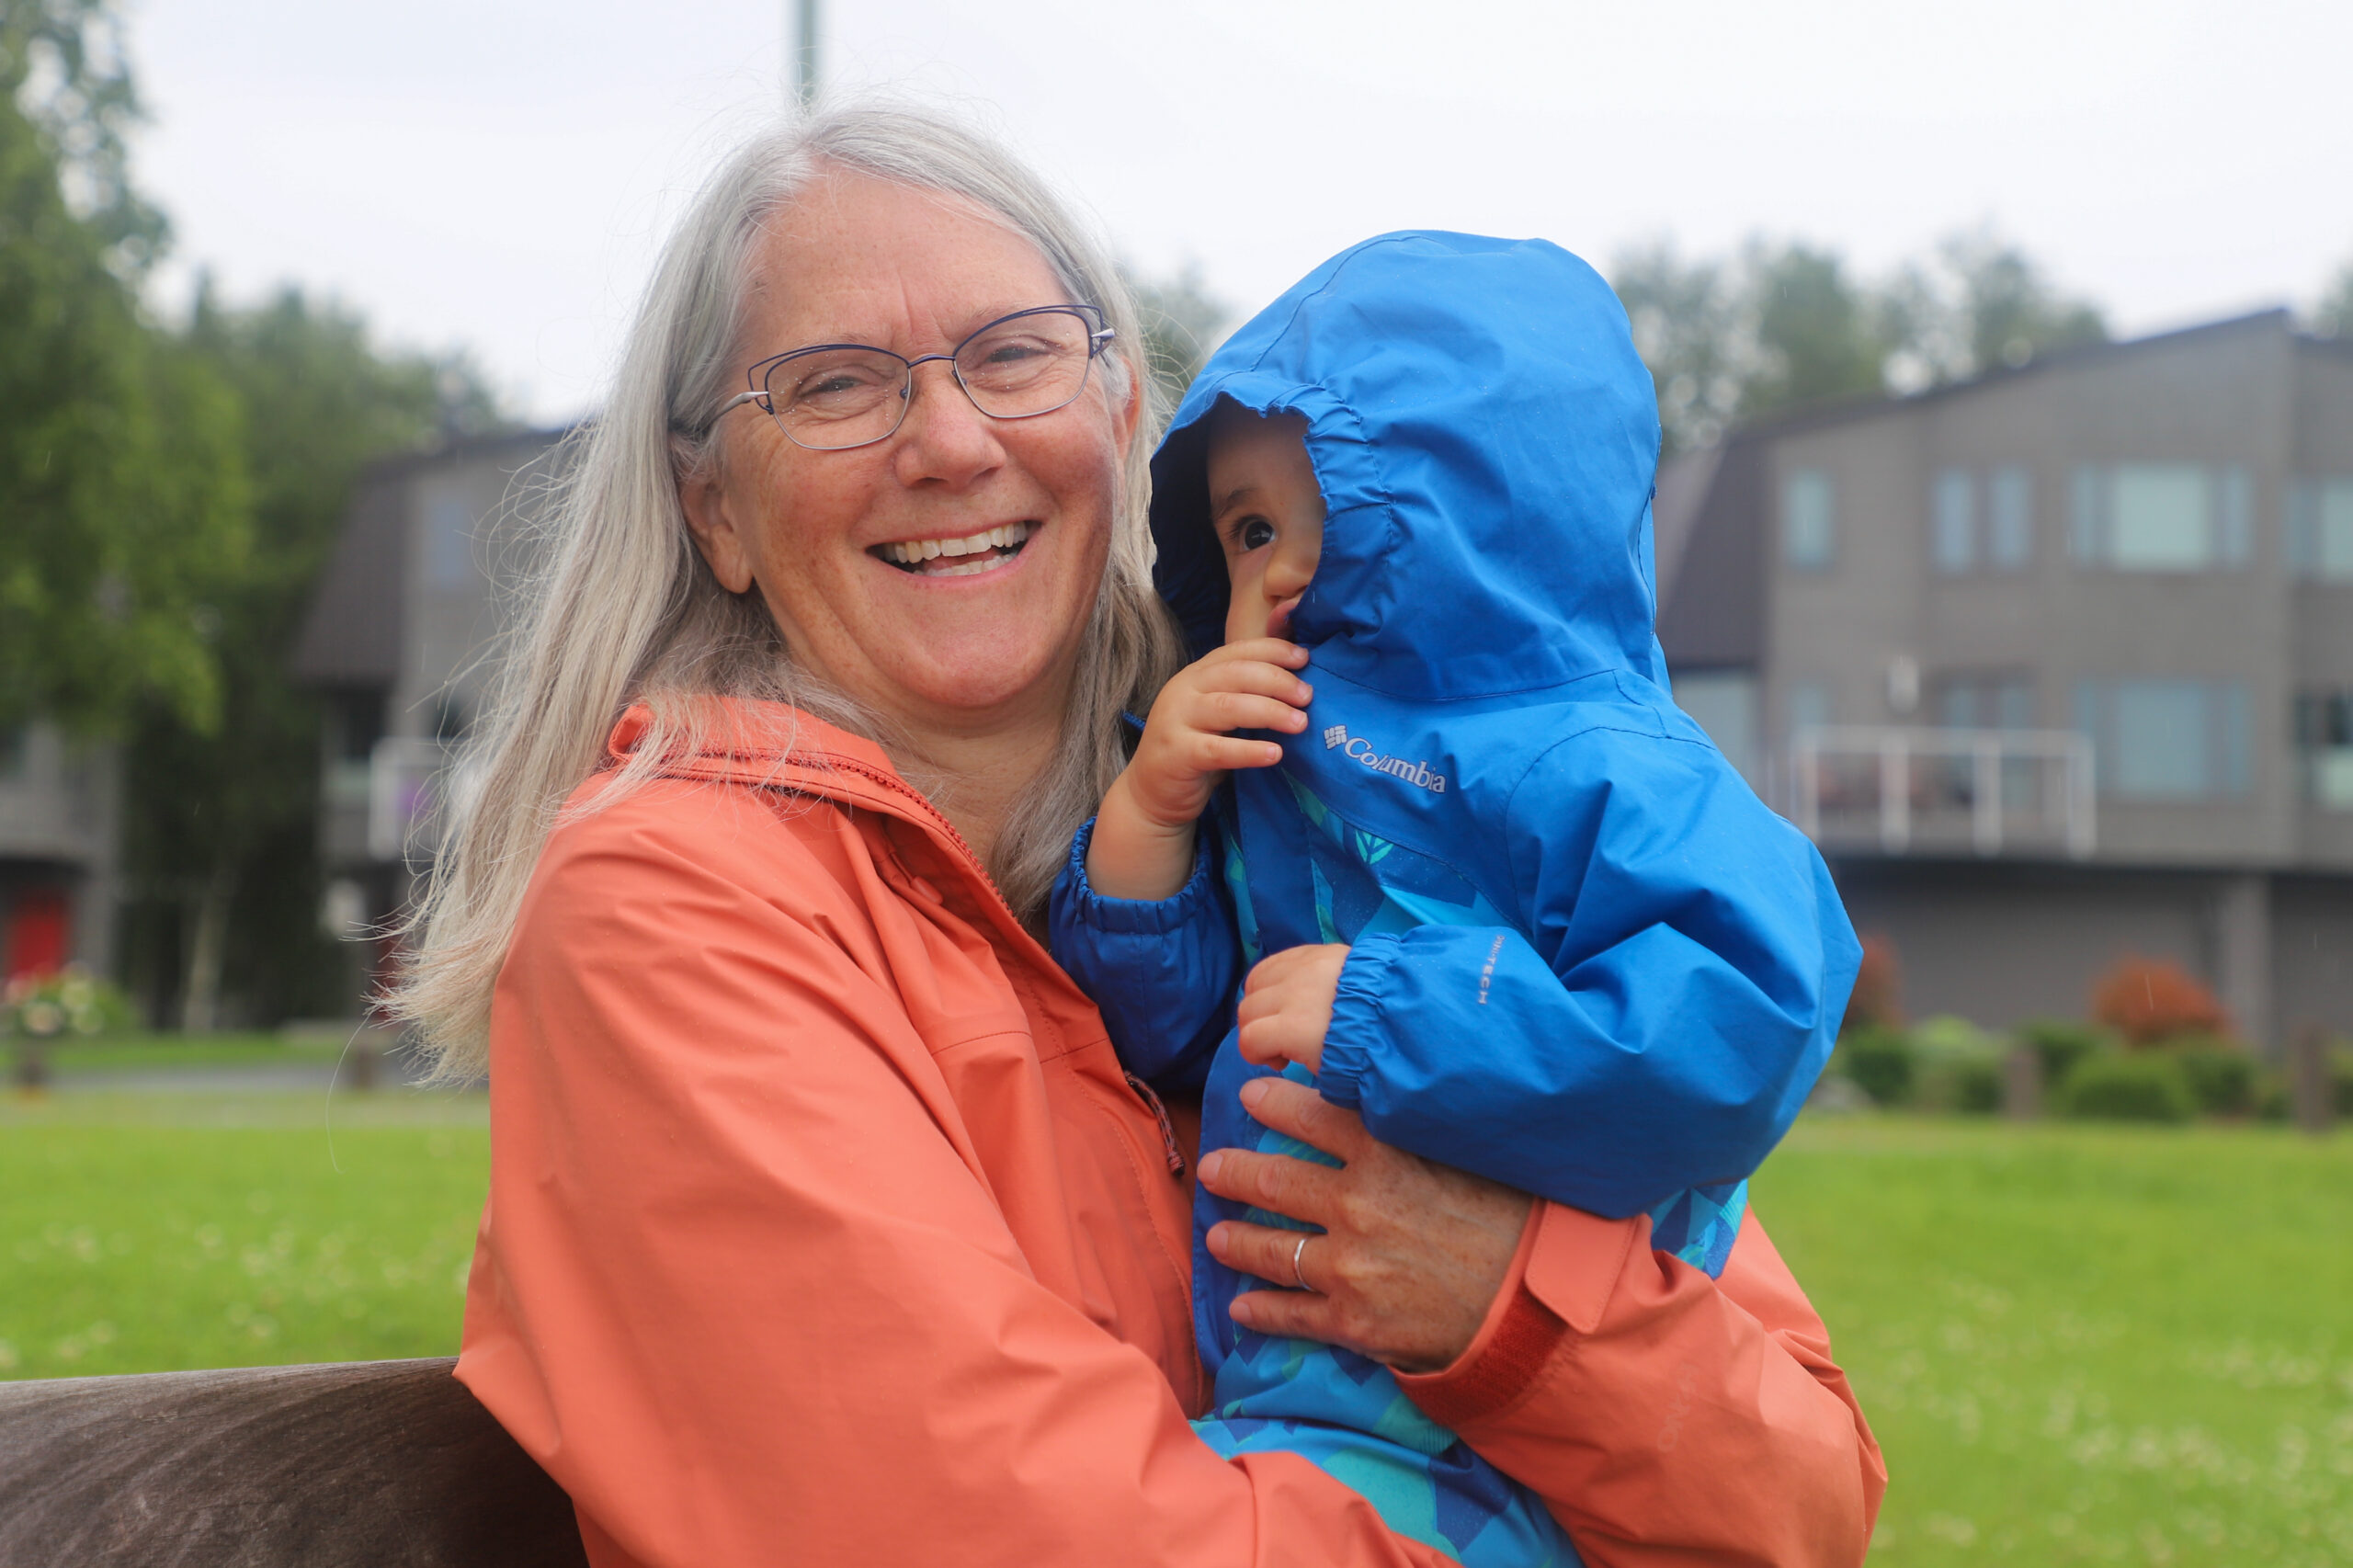 A woman with grey hair in a pink raincoat holds a child wearing a blue raincoat